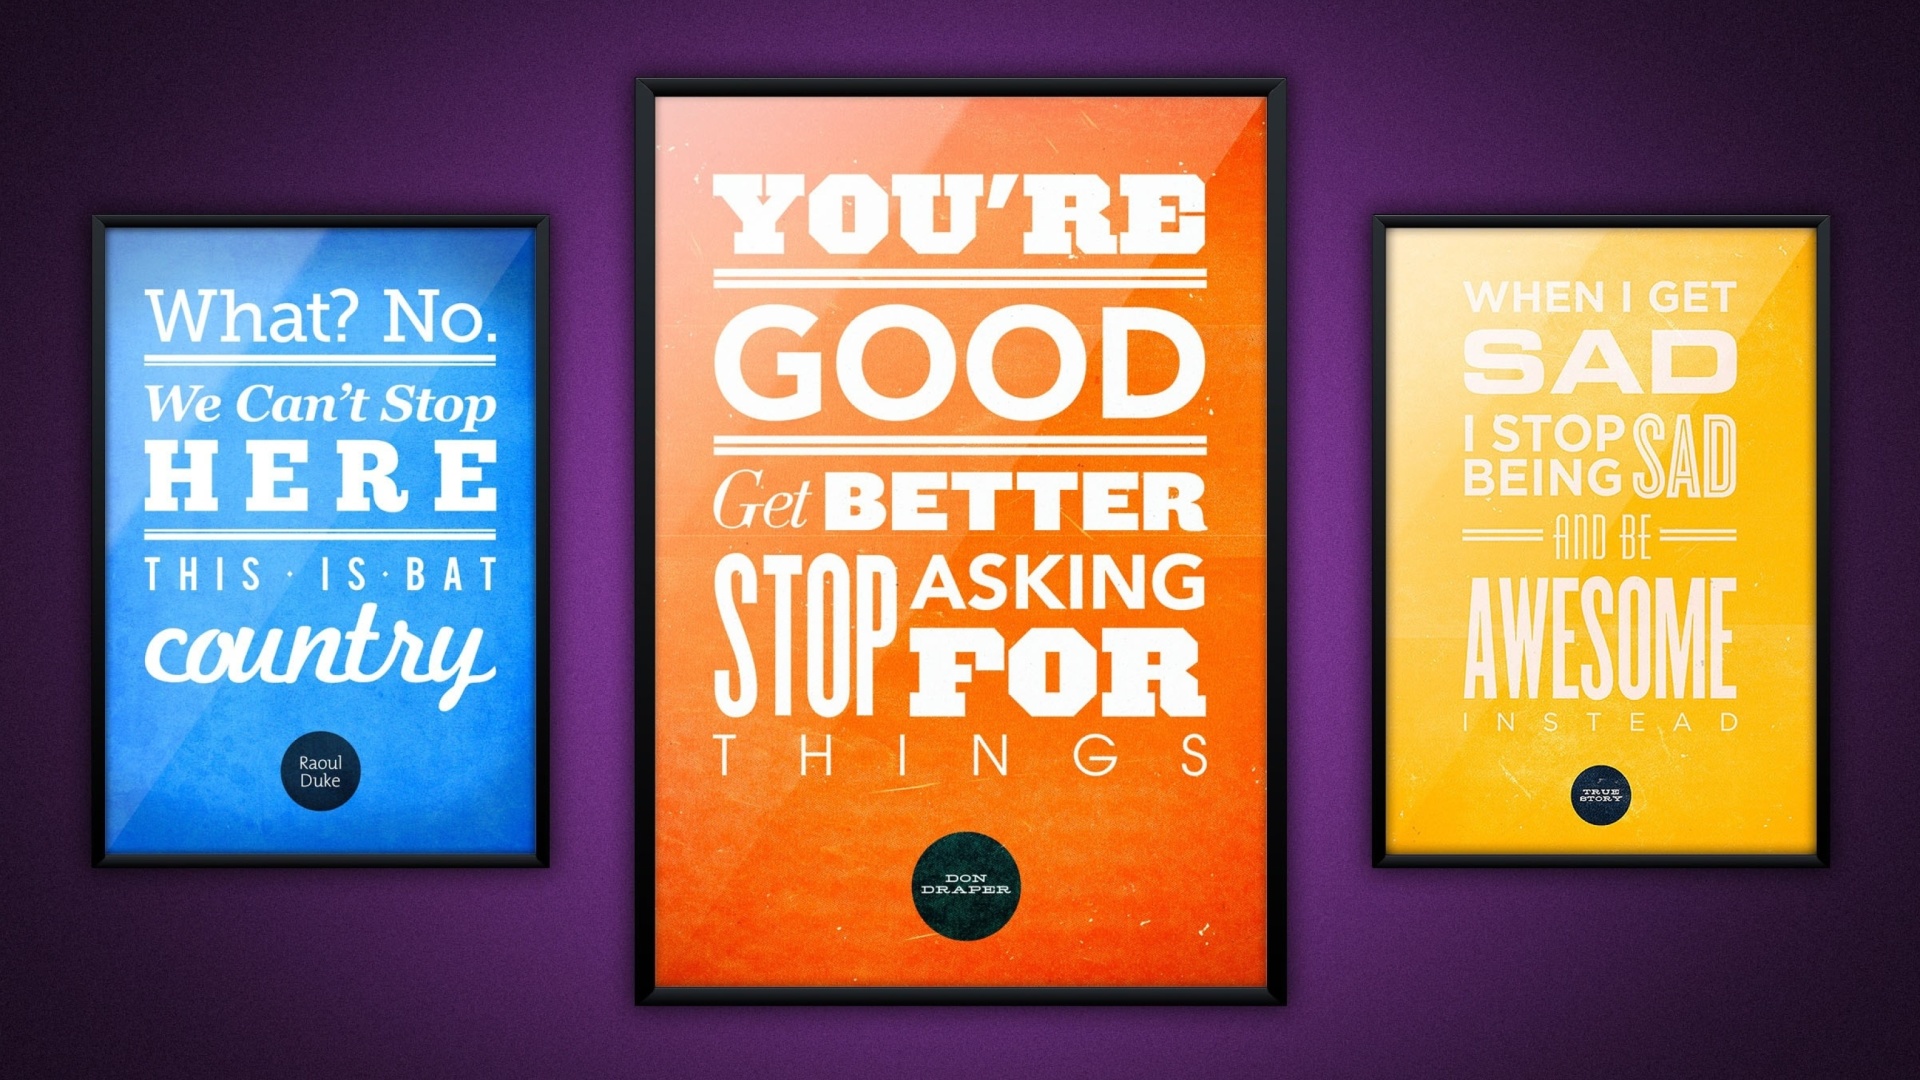 Motivational phrase You re good, Get better, Stop asking for Things screenshot #1 1920x1080